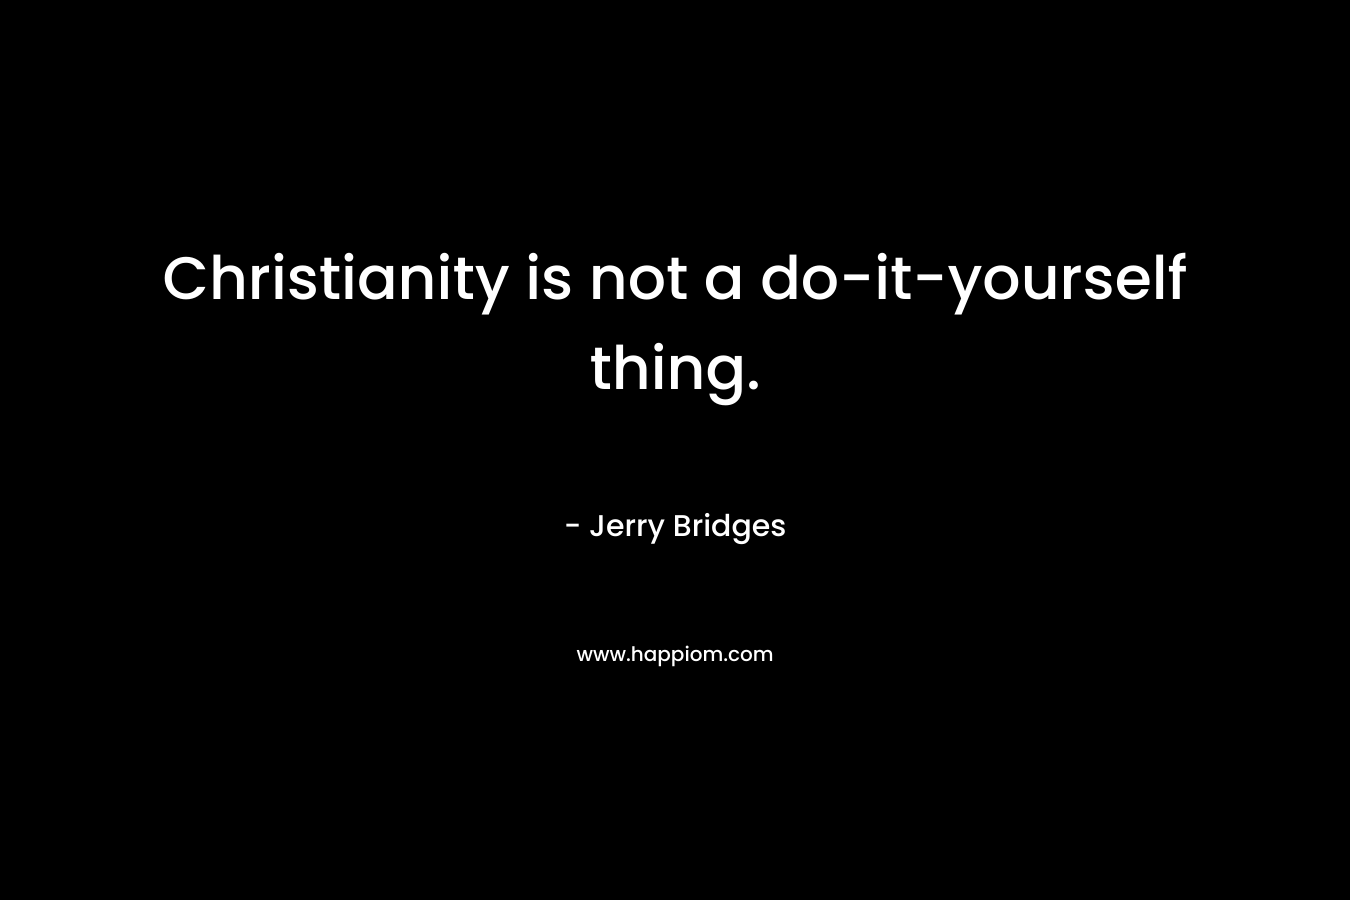 Christianity is not a do-it-yourself thing. – Jerry Bridges